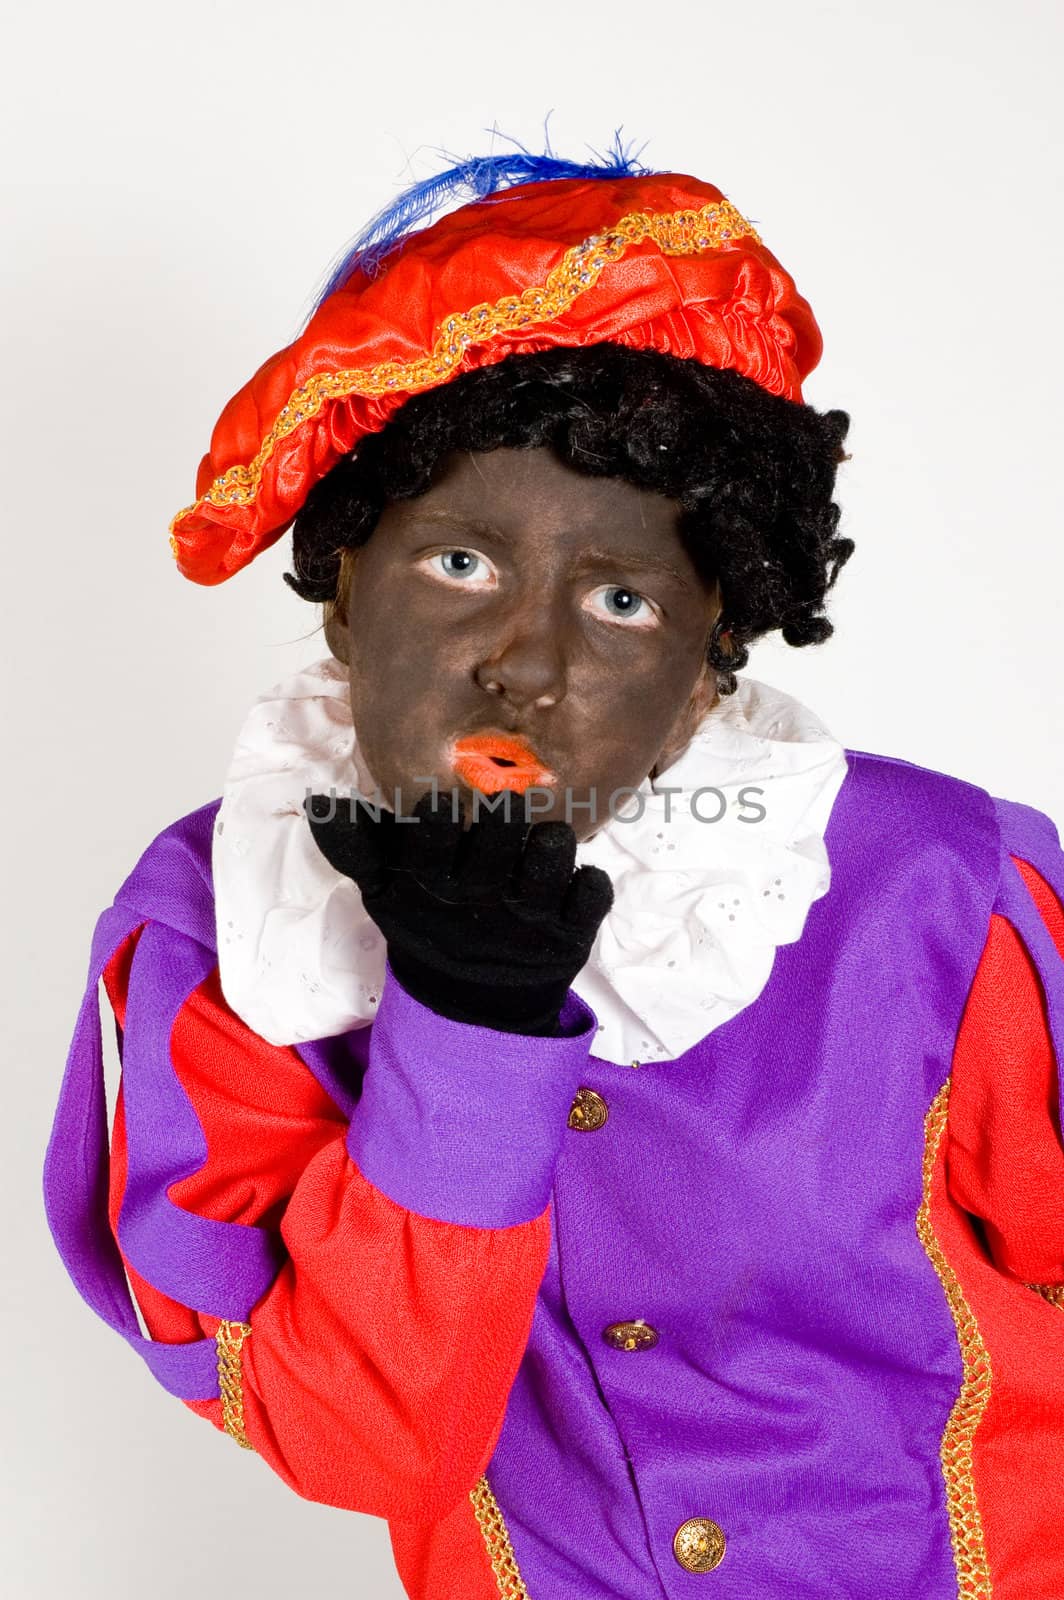 girl dressed up as zwarte piet blowing a handkiss on white